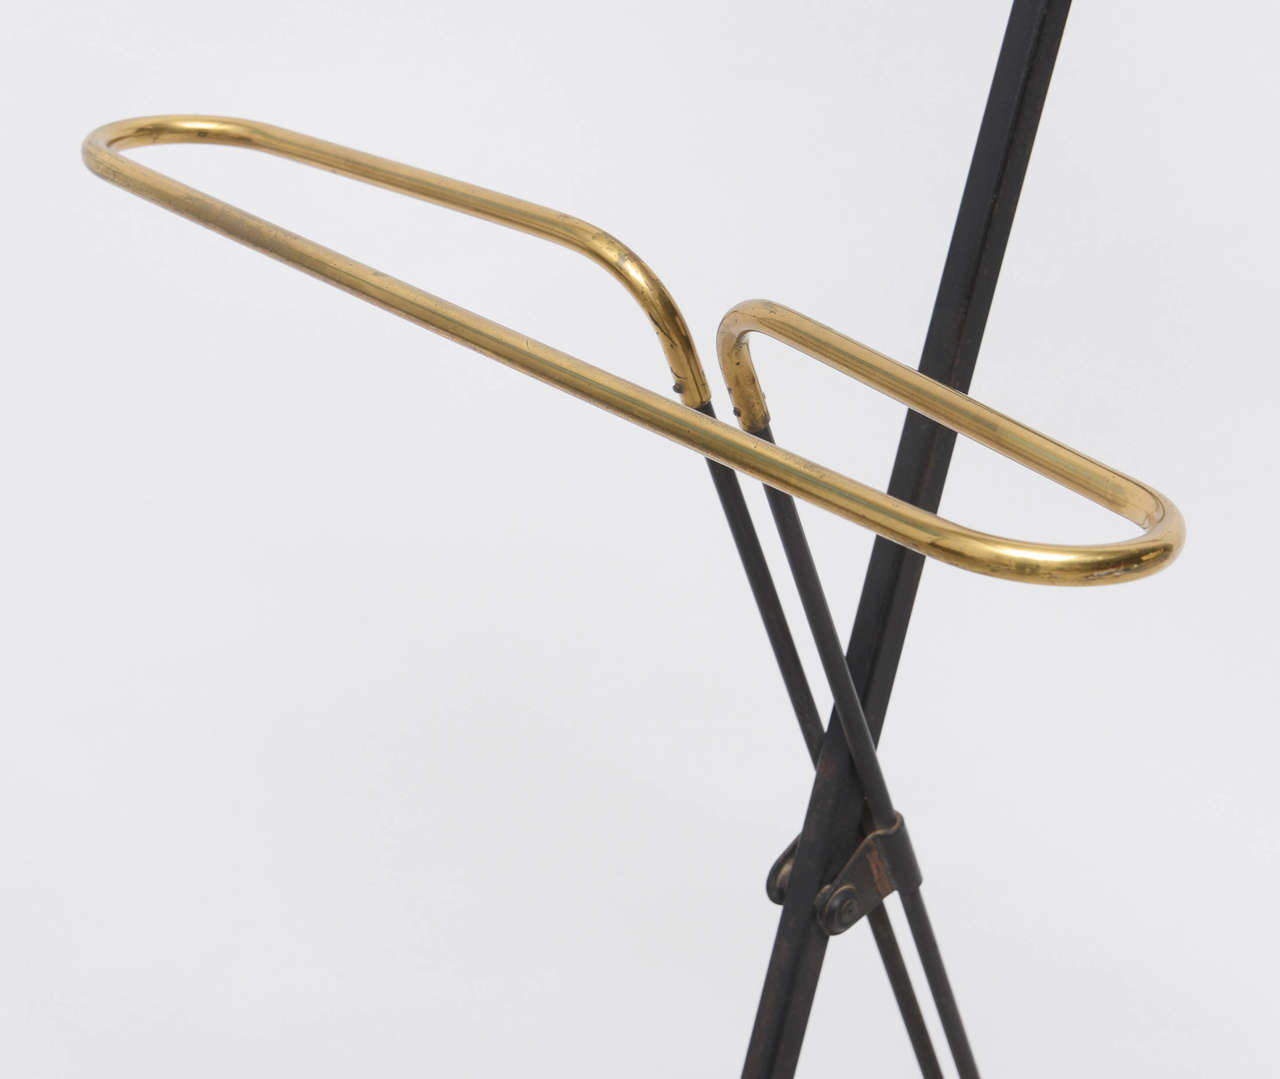 Mid-20th Century Mid-Century Modern French Wood and Brass Men's Valet Stand, Coat Stand